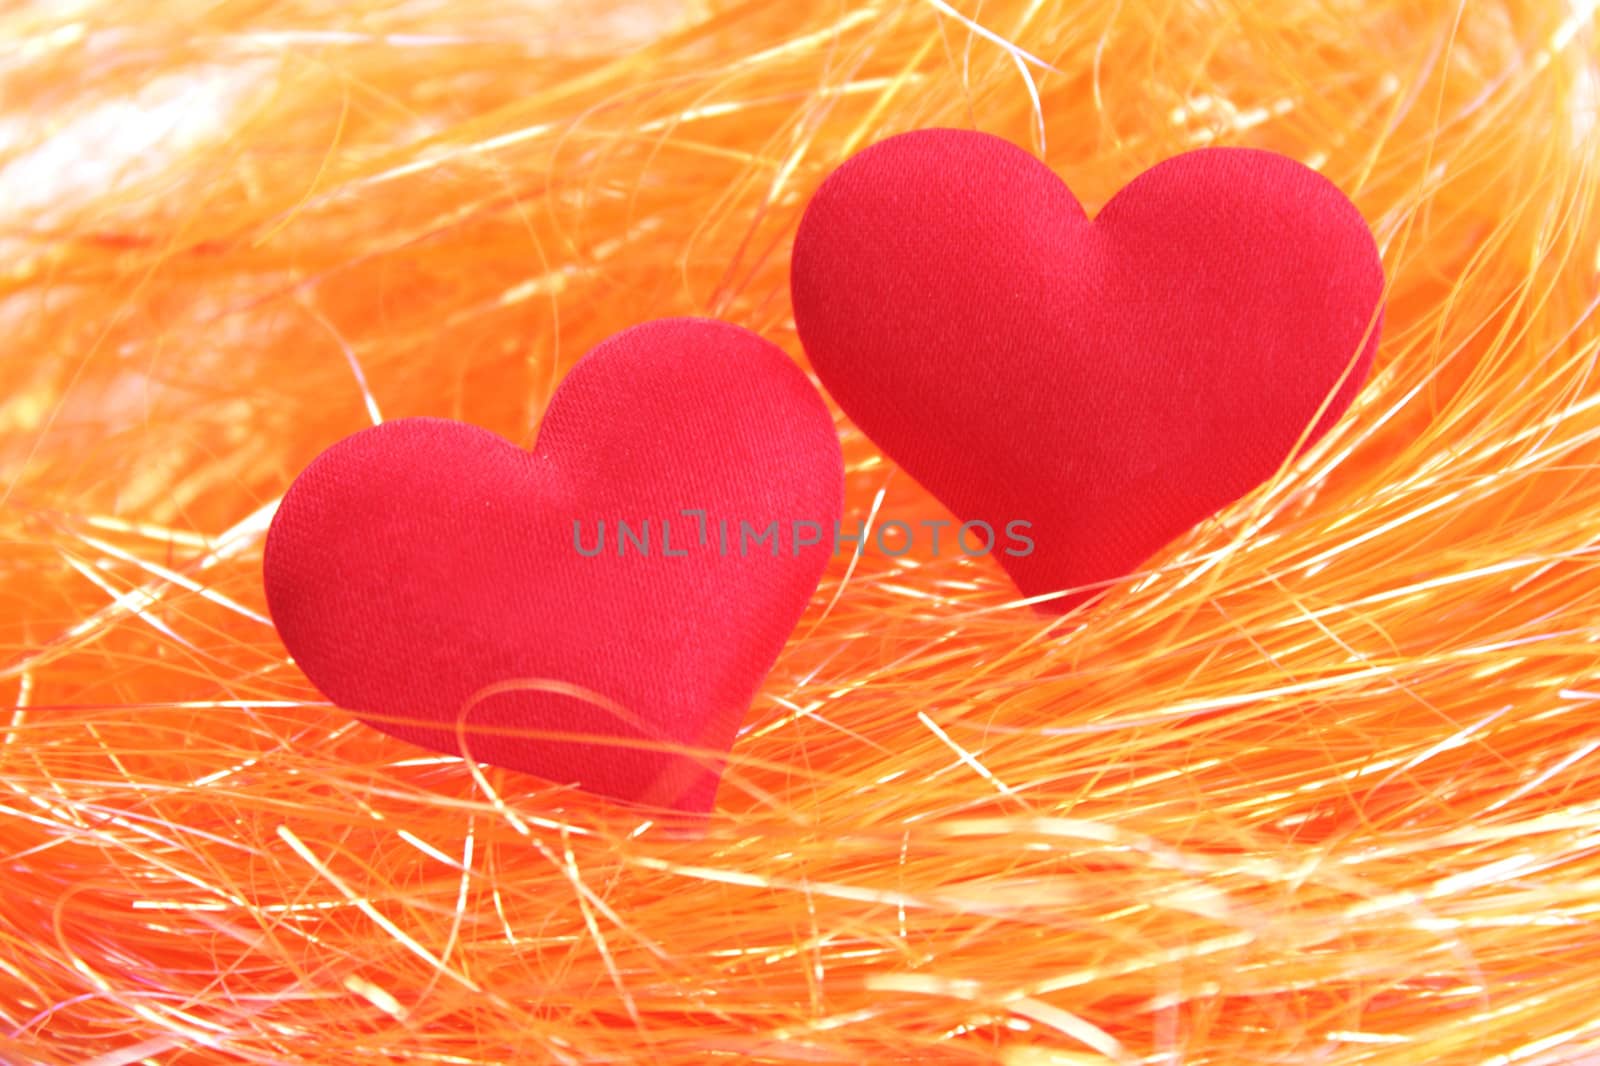 The pair of hearts in the orange nest from the threads